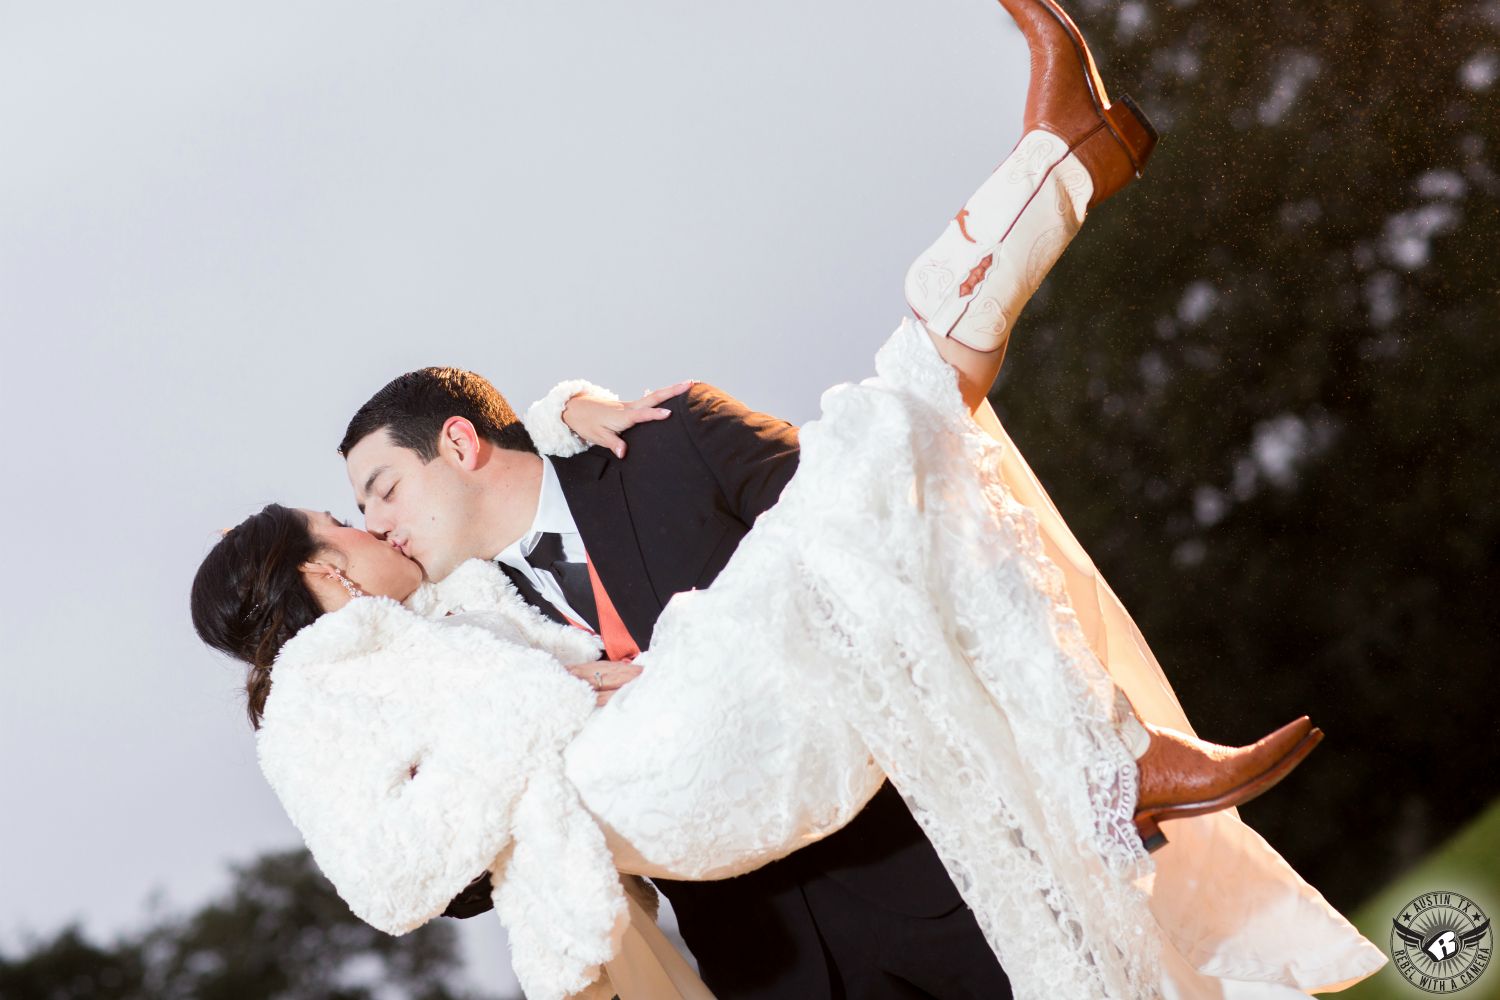 Groom in black tuxedo and orange vest holds bride in lace wedding dress and white fur coat as she kisses him and kicks her Longhorn boots in the air at Rustic wedding venue Gabriel Springs in Georgetown, Texas.